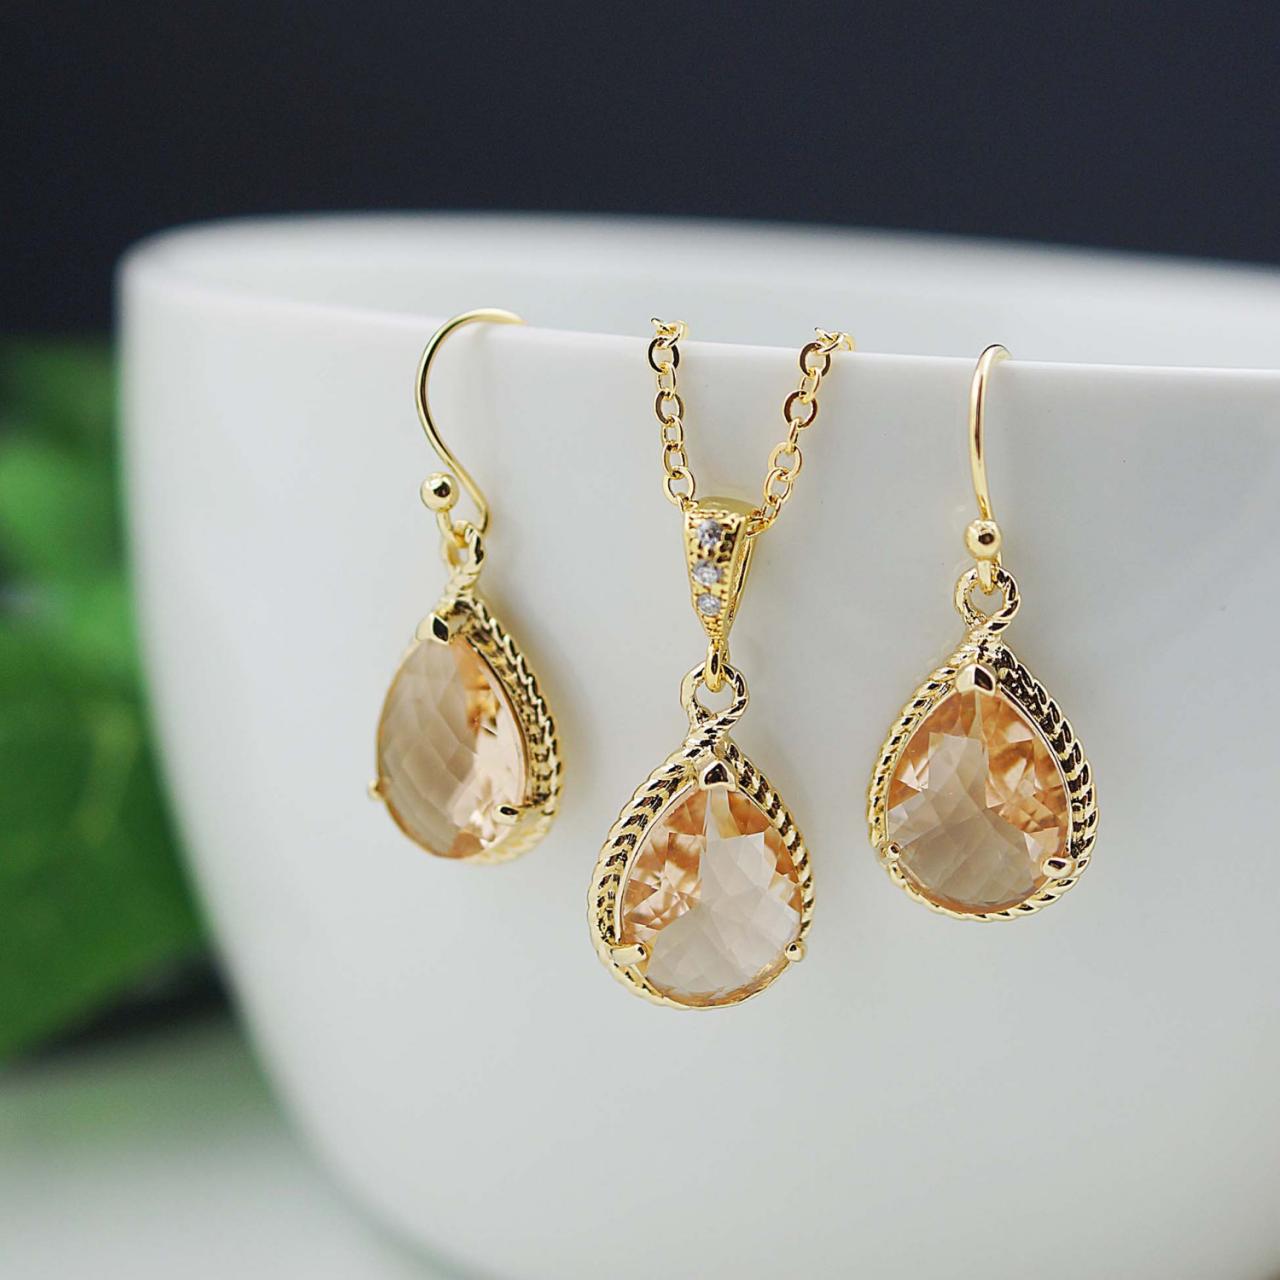 Wedding Jewelry Bridesmaid Jewelry Bridesmaid Earrings Bridal Jewelry Peach Gold Trimmed Pear Cut Bridesmaid Gift